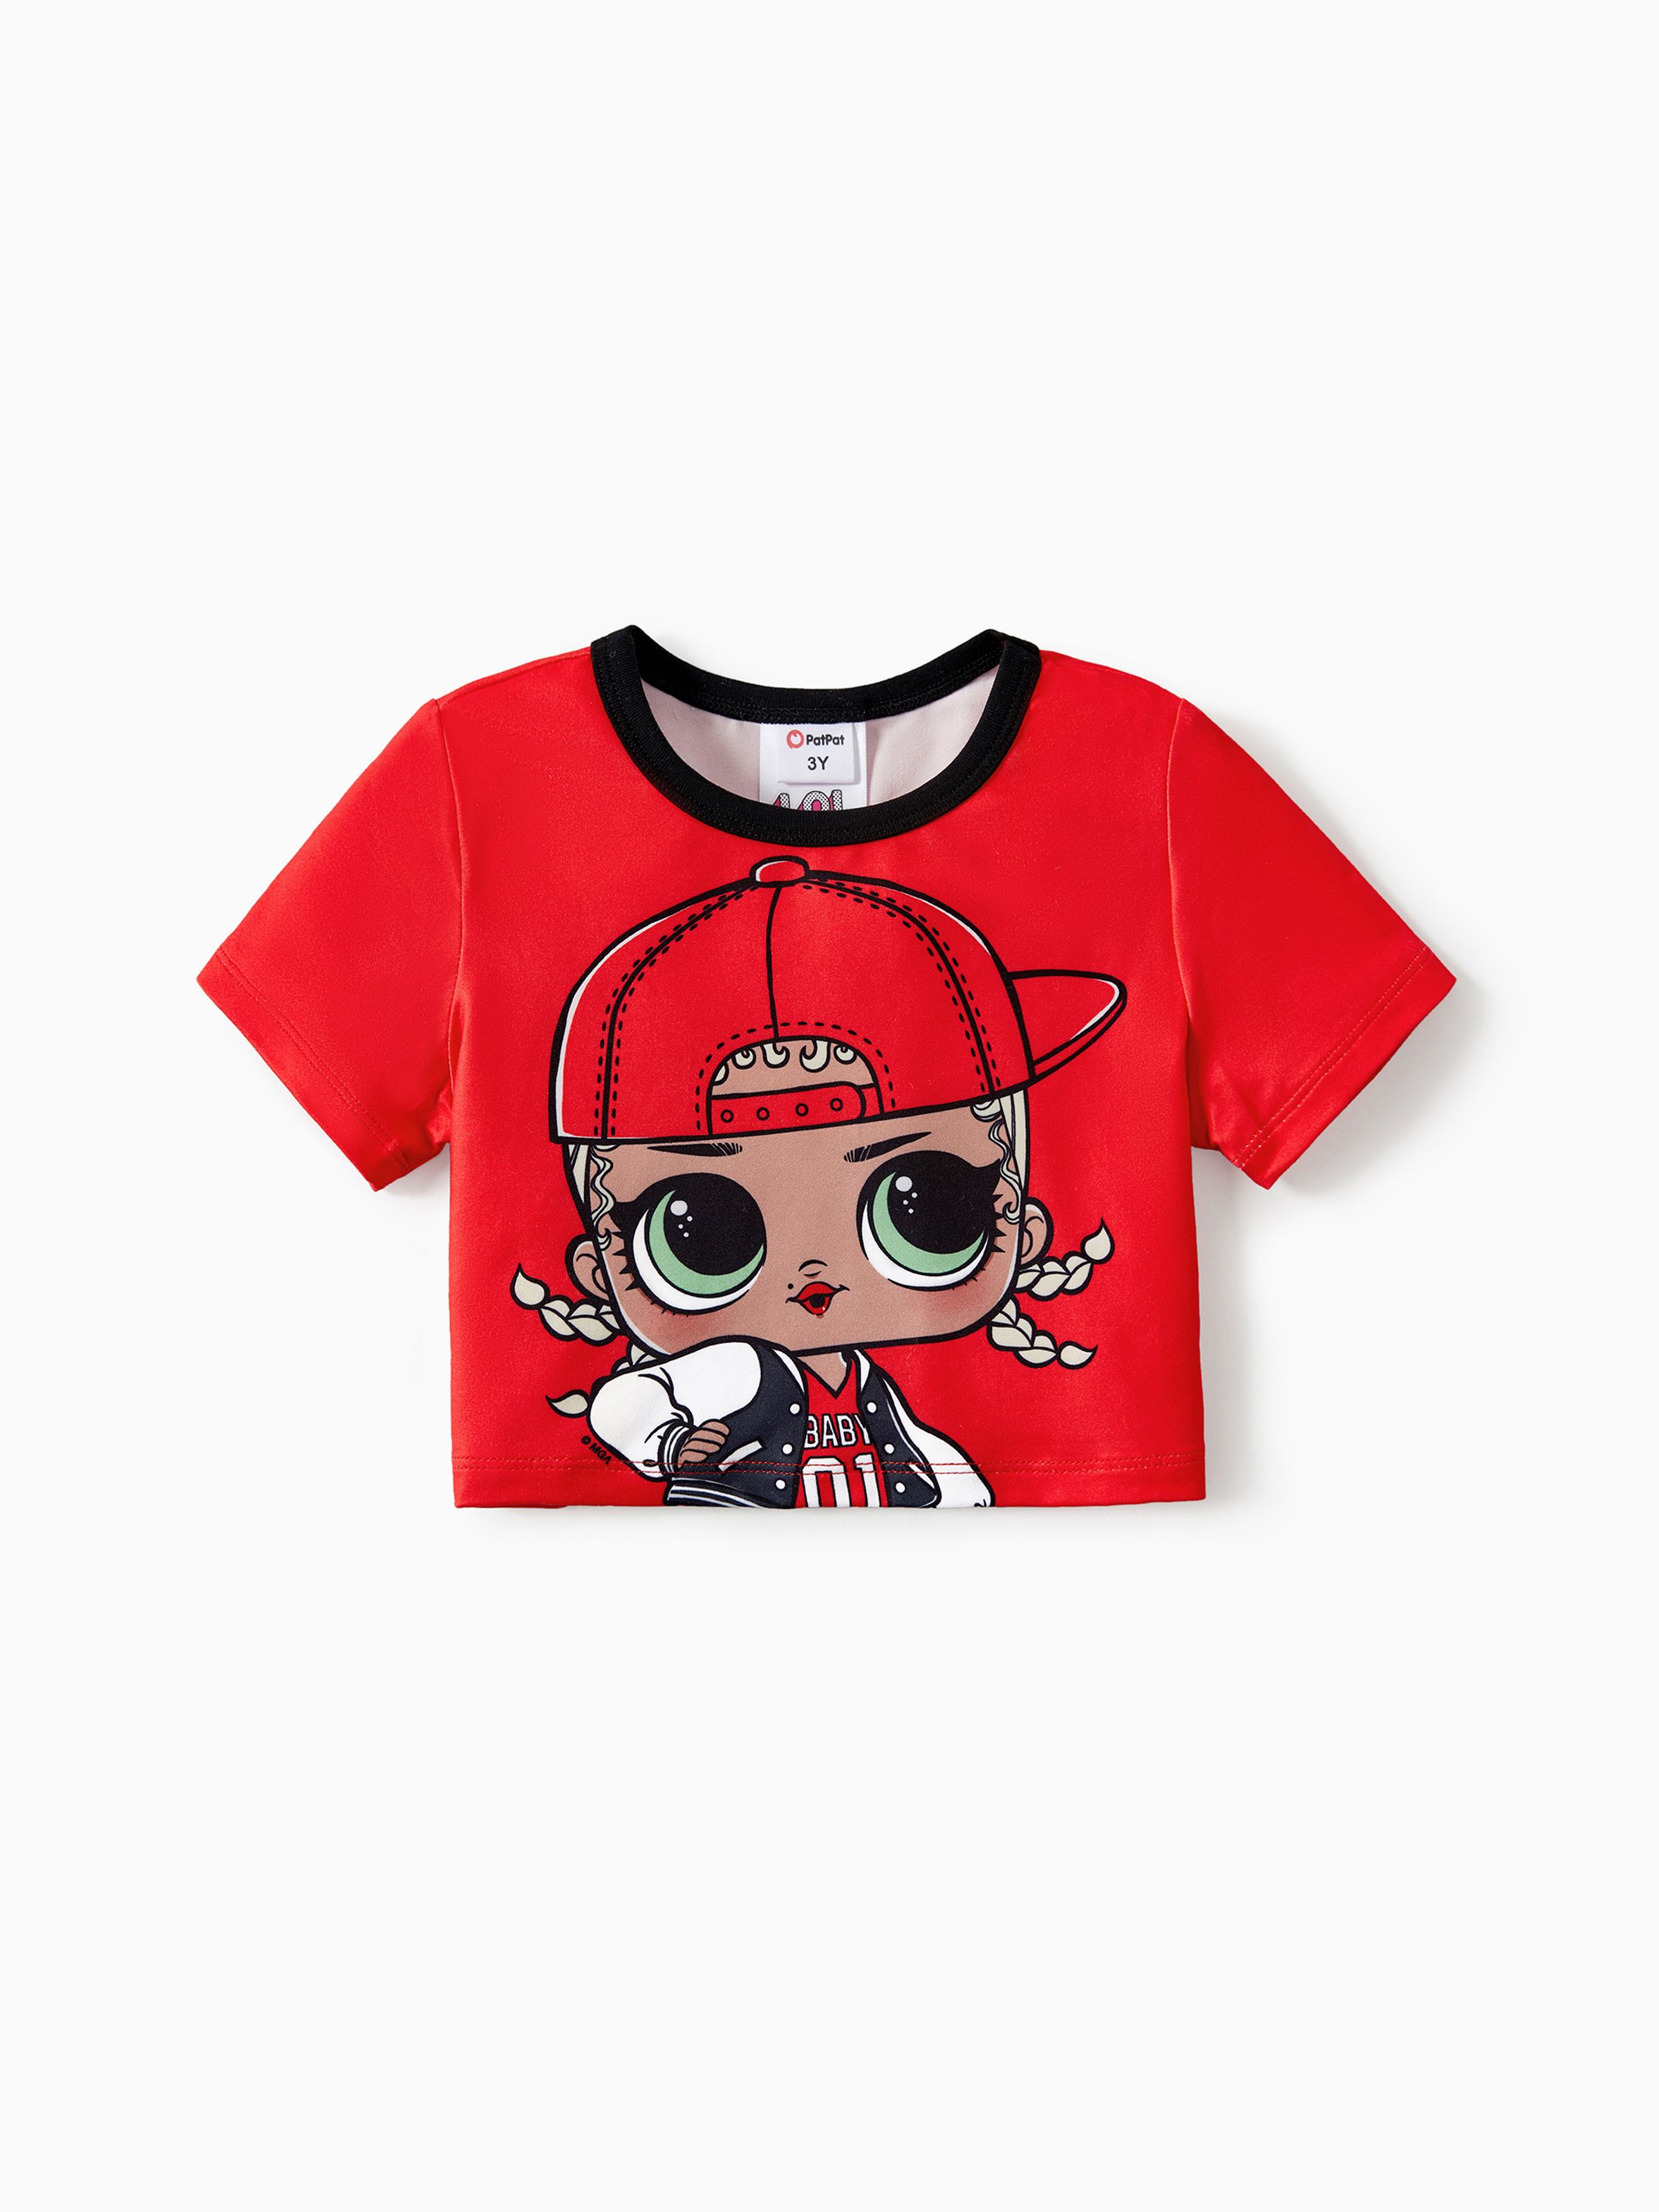 

L.O.L. SURPRISE! Toddler/Kid Girl Graphic Print Short-sleeve Tee